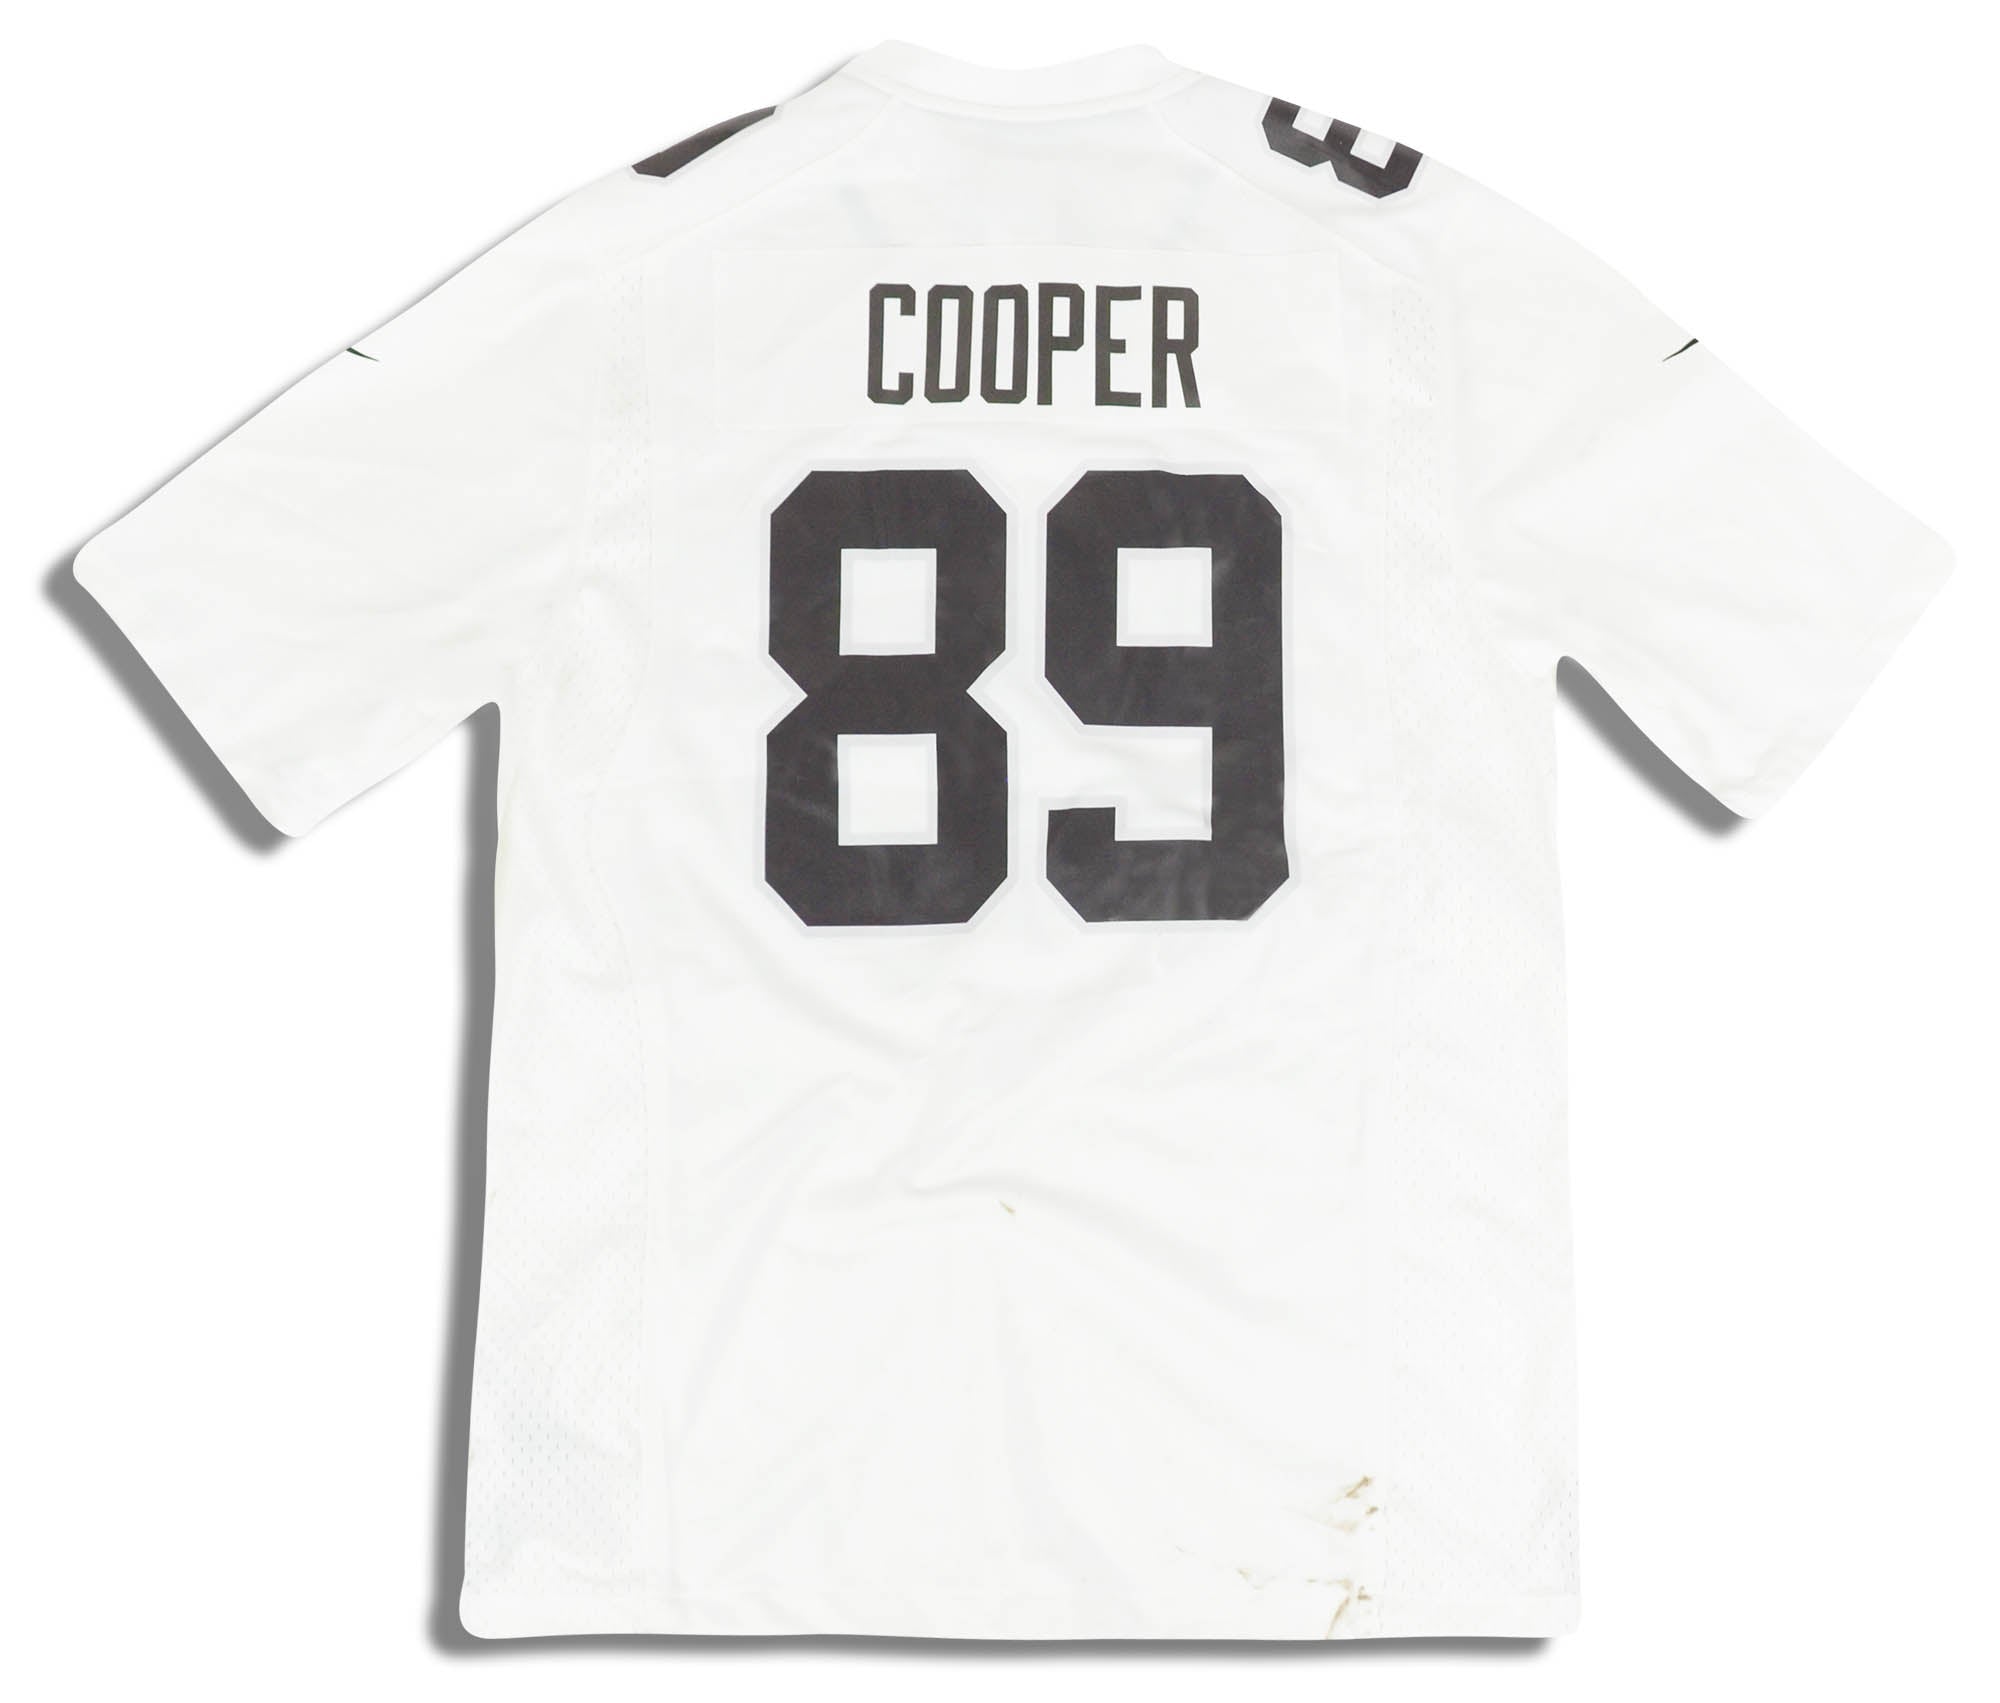 2018 OAKLAND RAIDERS COOPER #89 NIKE GAME JERSEY (AWAY) M - W/TAGS